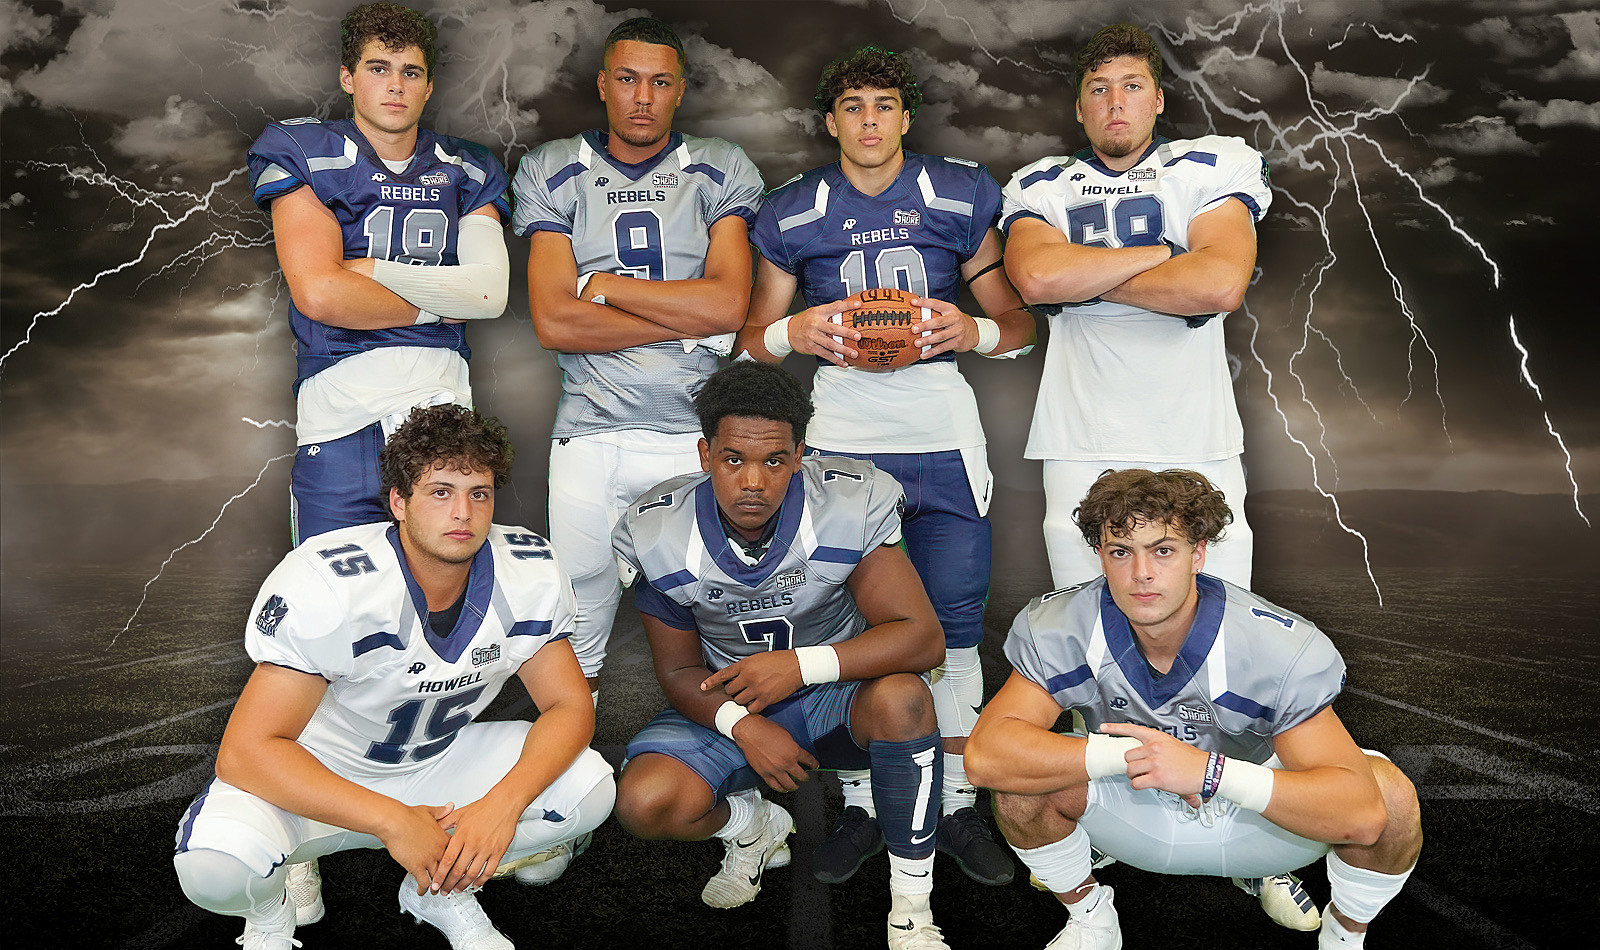 Howell High School 2021 Football Preview